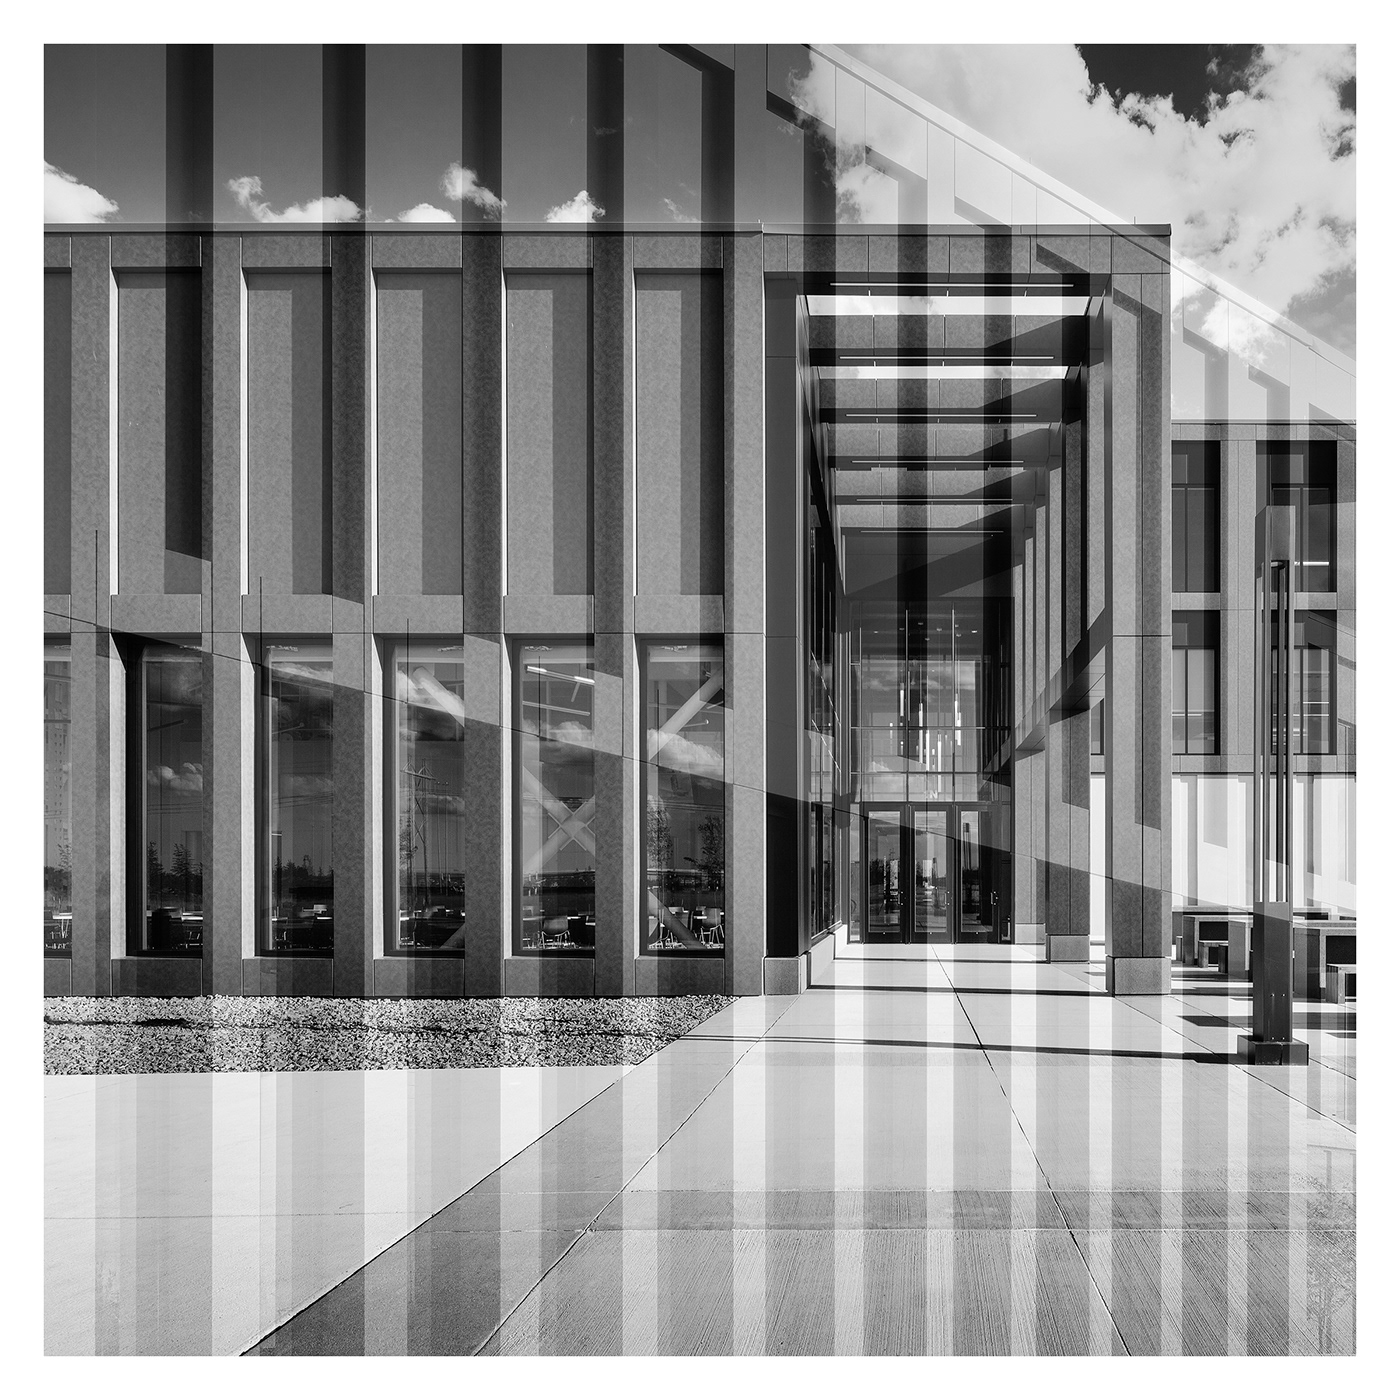 abstractions Architectural Abstracts architecture B&W Architecture composites peterjsieger PJSdblviews sieger